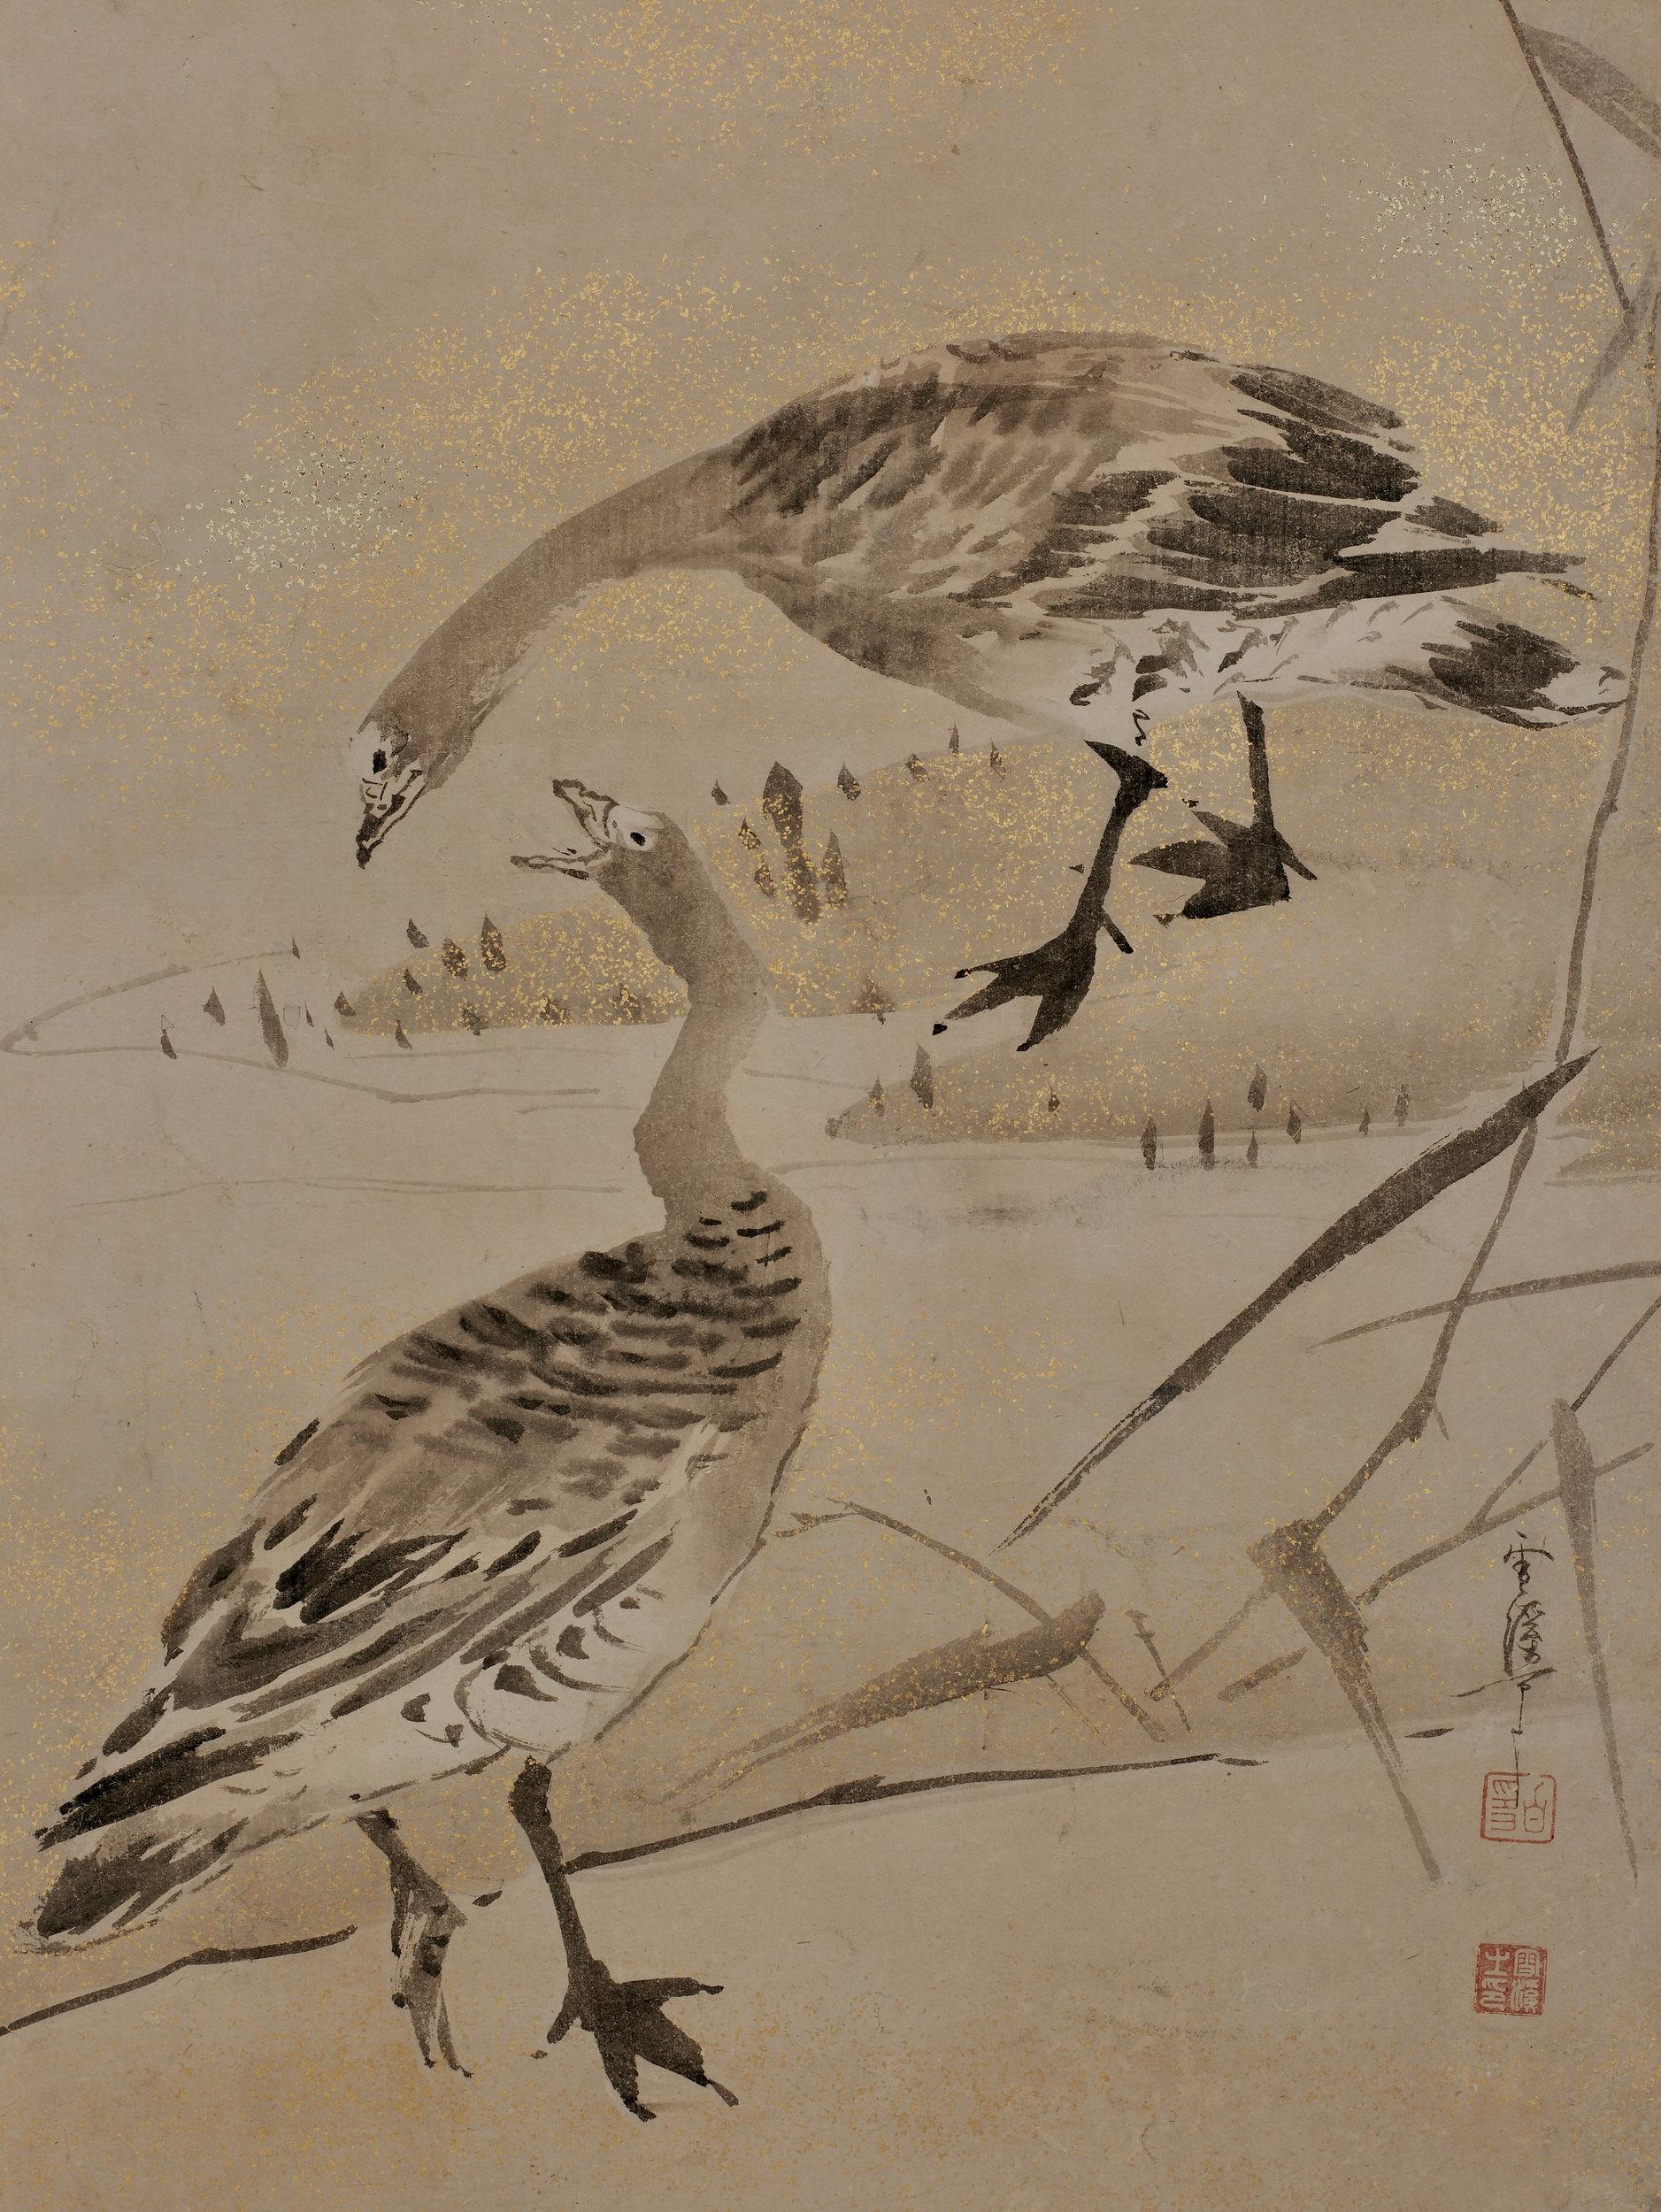 Yamaguchi Sekkei, (1644-1732)

Geese and reeds

Framed panel, ink and gold fleck on paper

Dimensions:

W. 54 cm x H. 128 cm (21” x 50”)

A 17th-18th century framed Japanese painting depicting a pair of wild geese amid reeds at the edge of